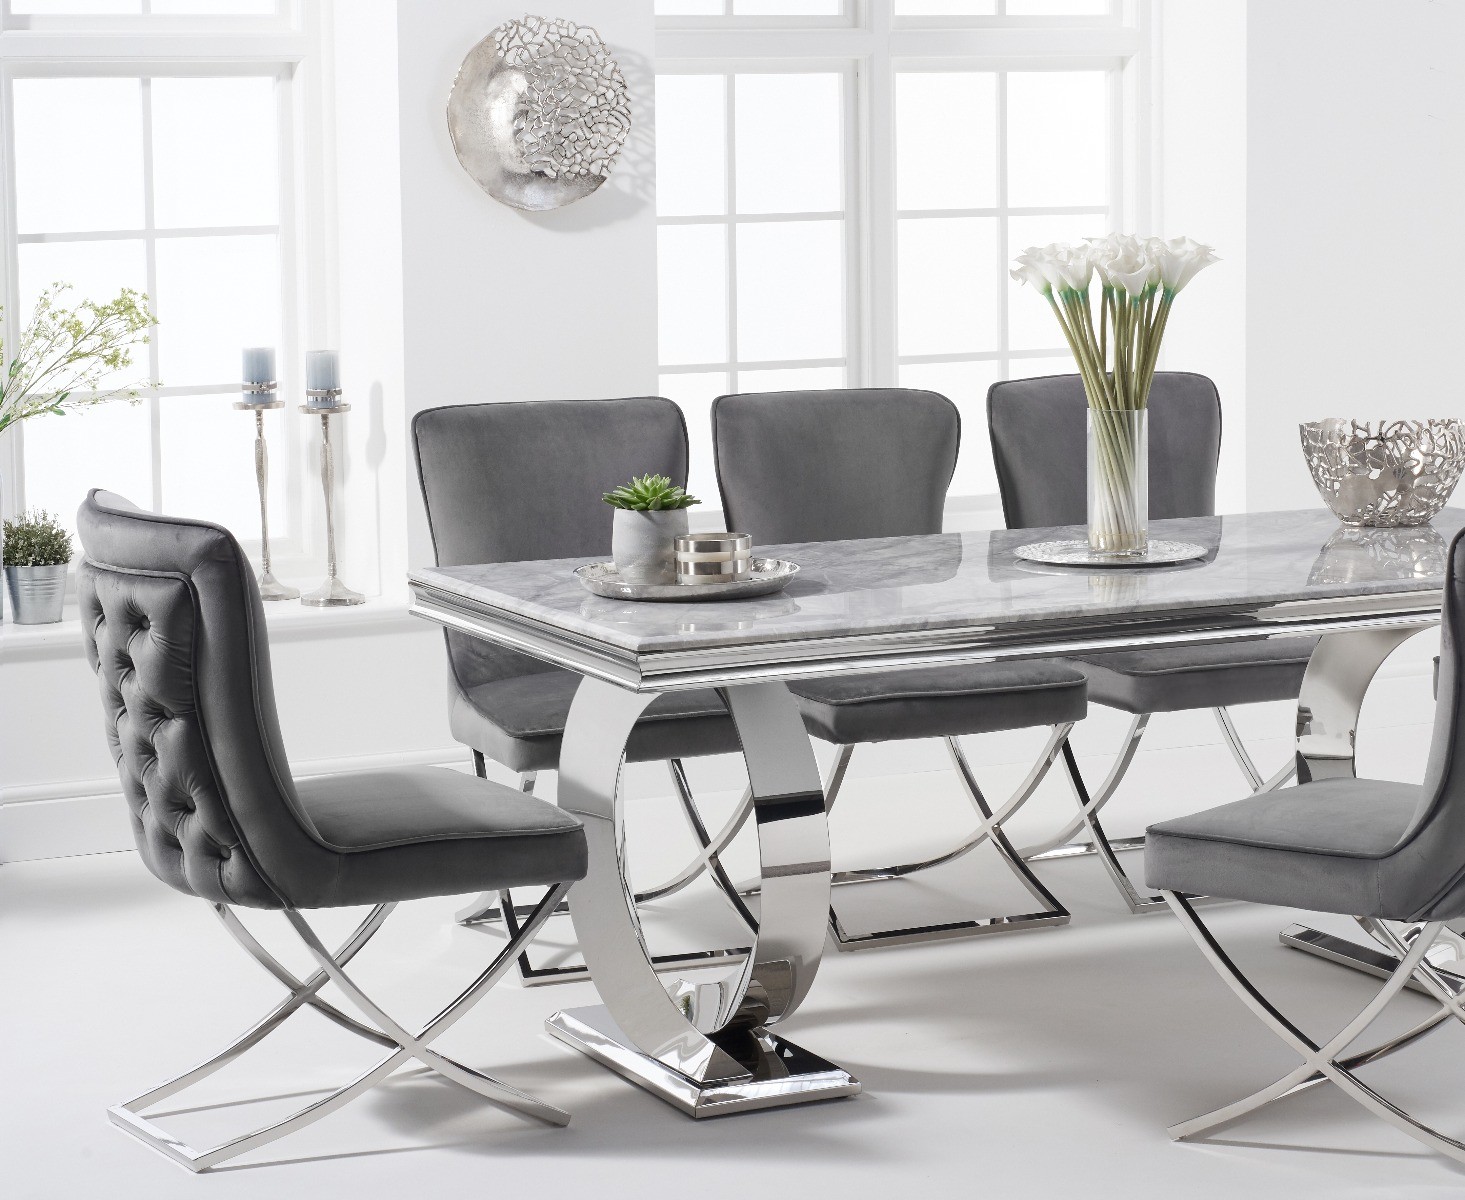 Photo 2 of Fabio 200cm marble dining table with 8 grey lorenzo chairs